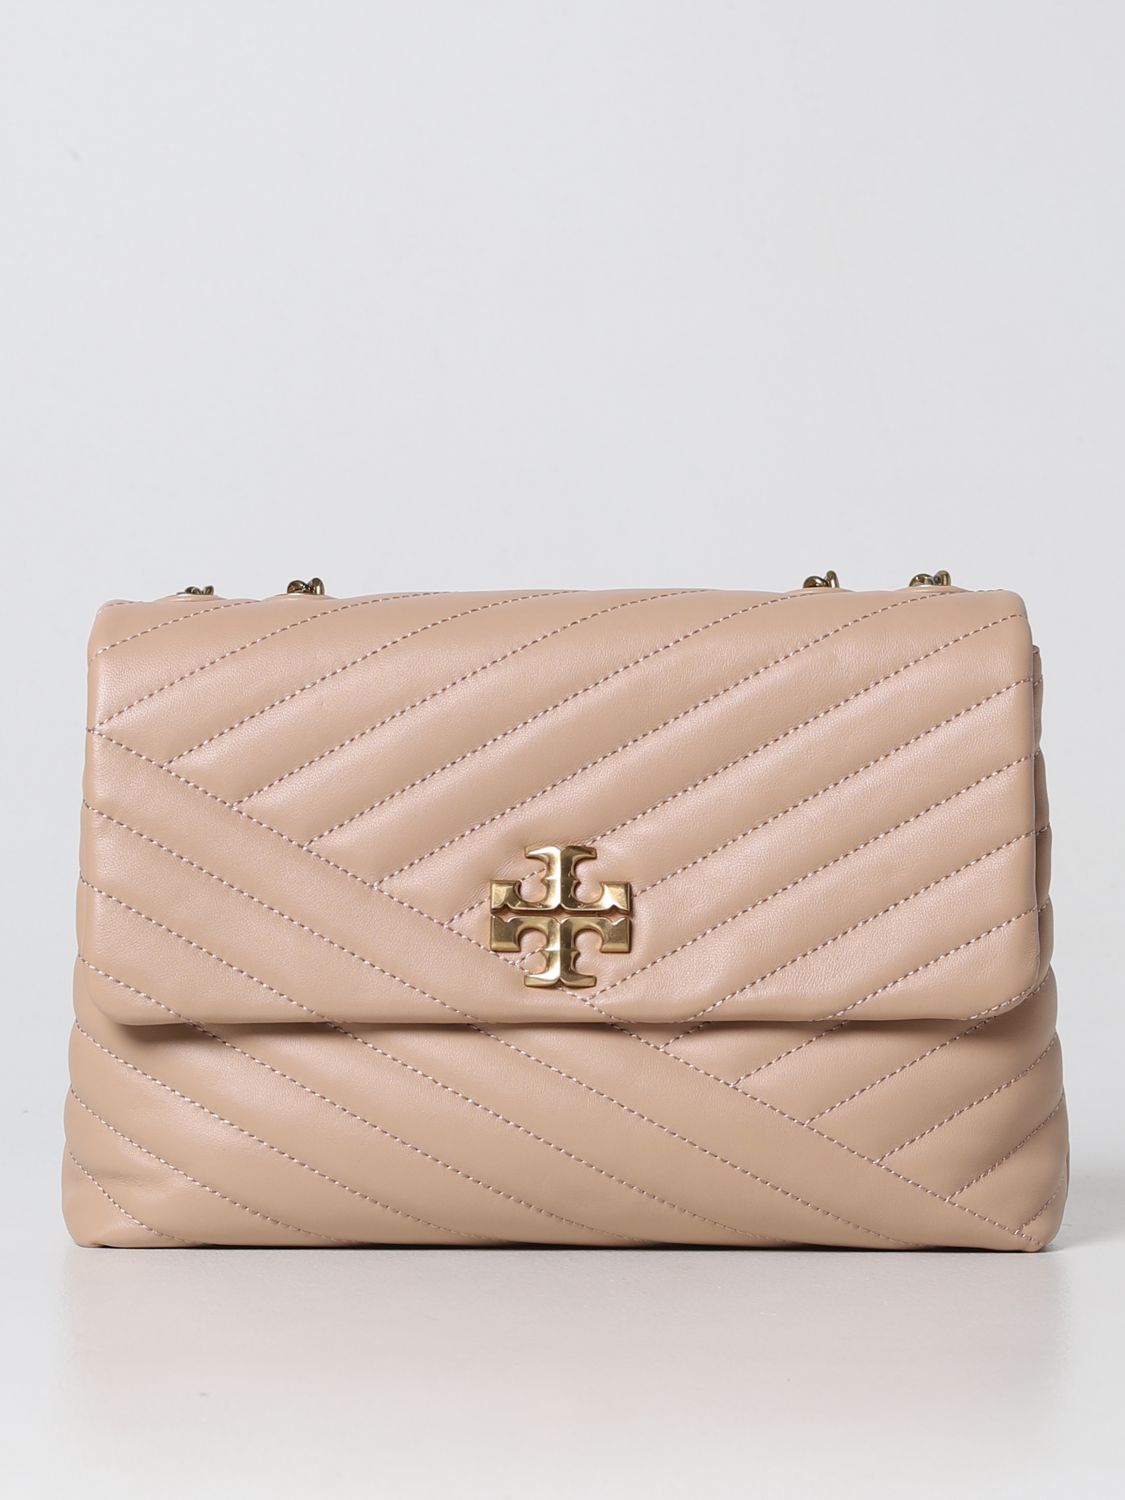 Tory Burch Outlet: Kira bag in quilted nappa leather - Pink